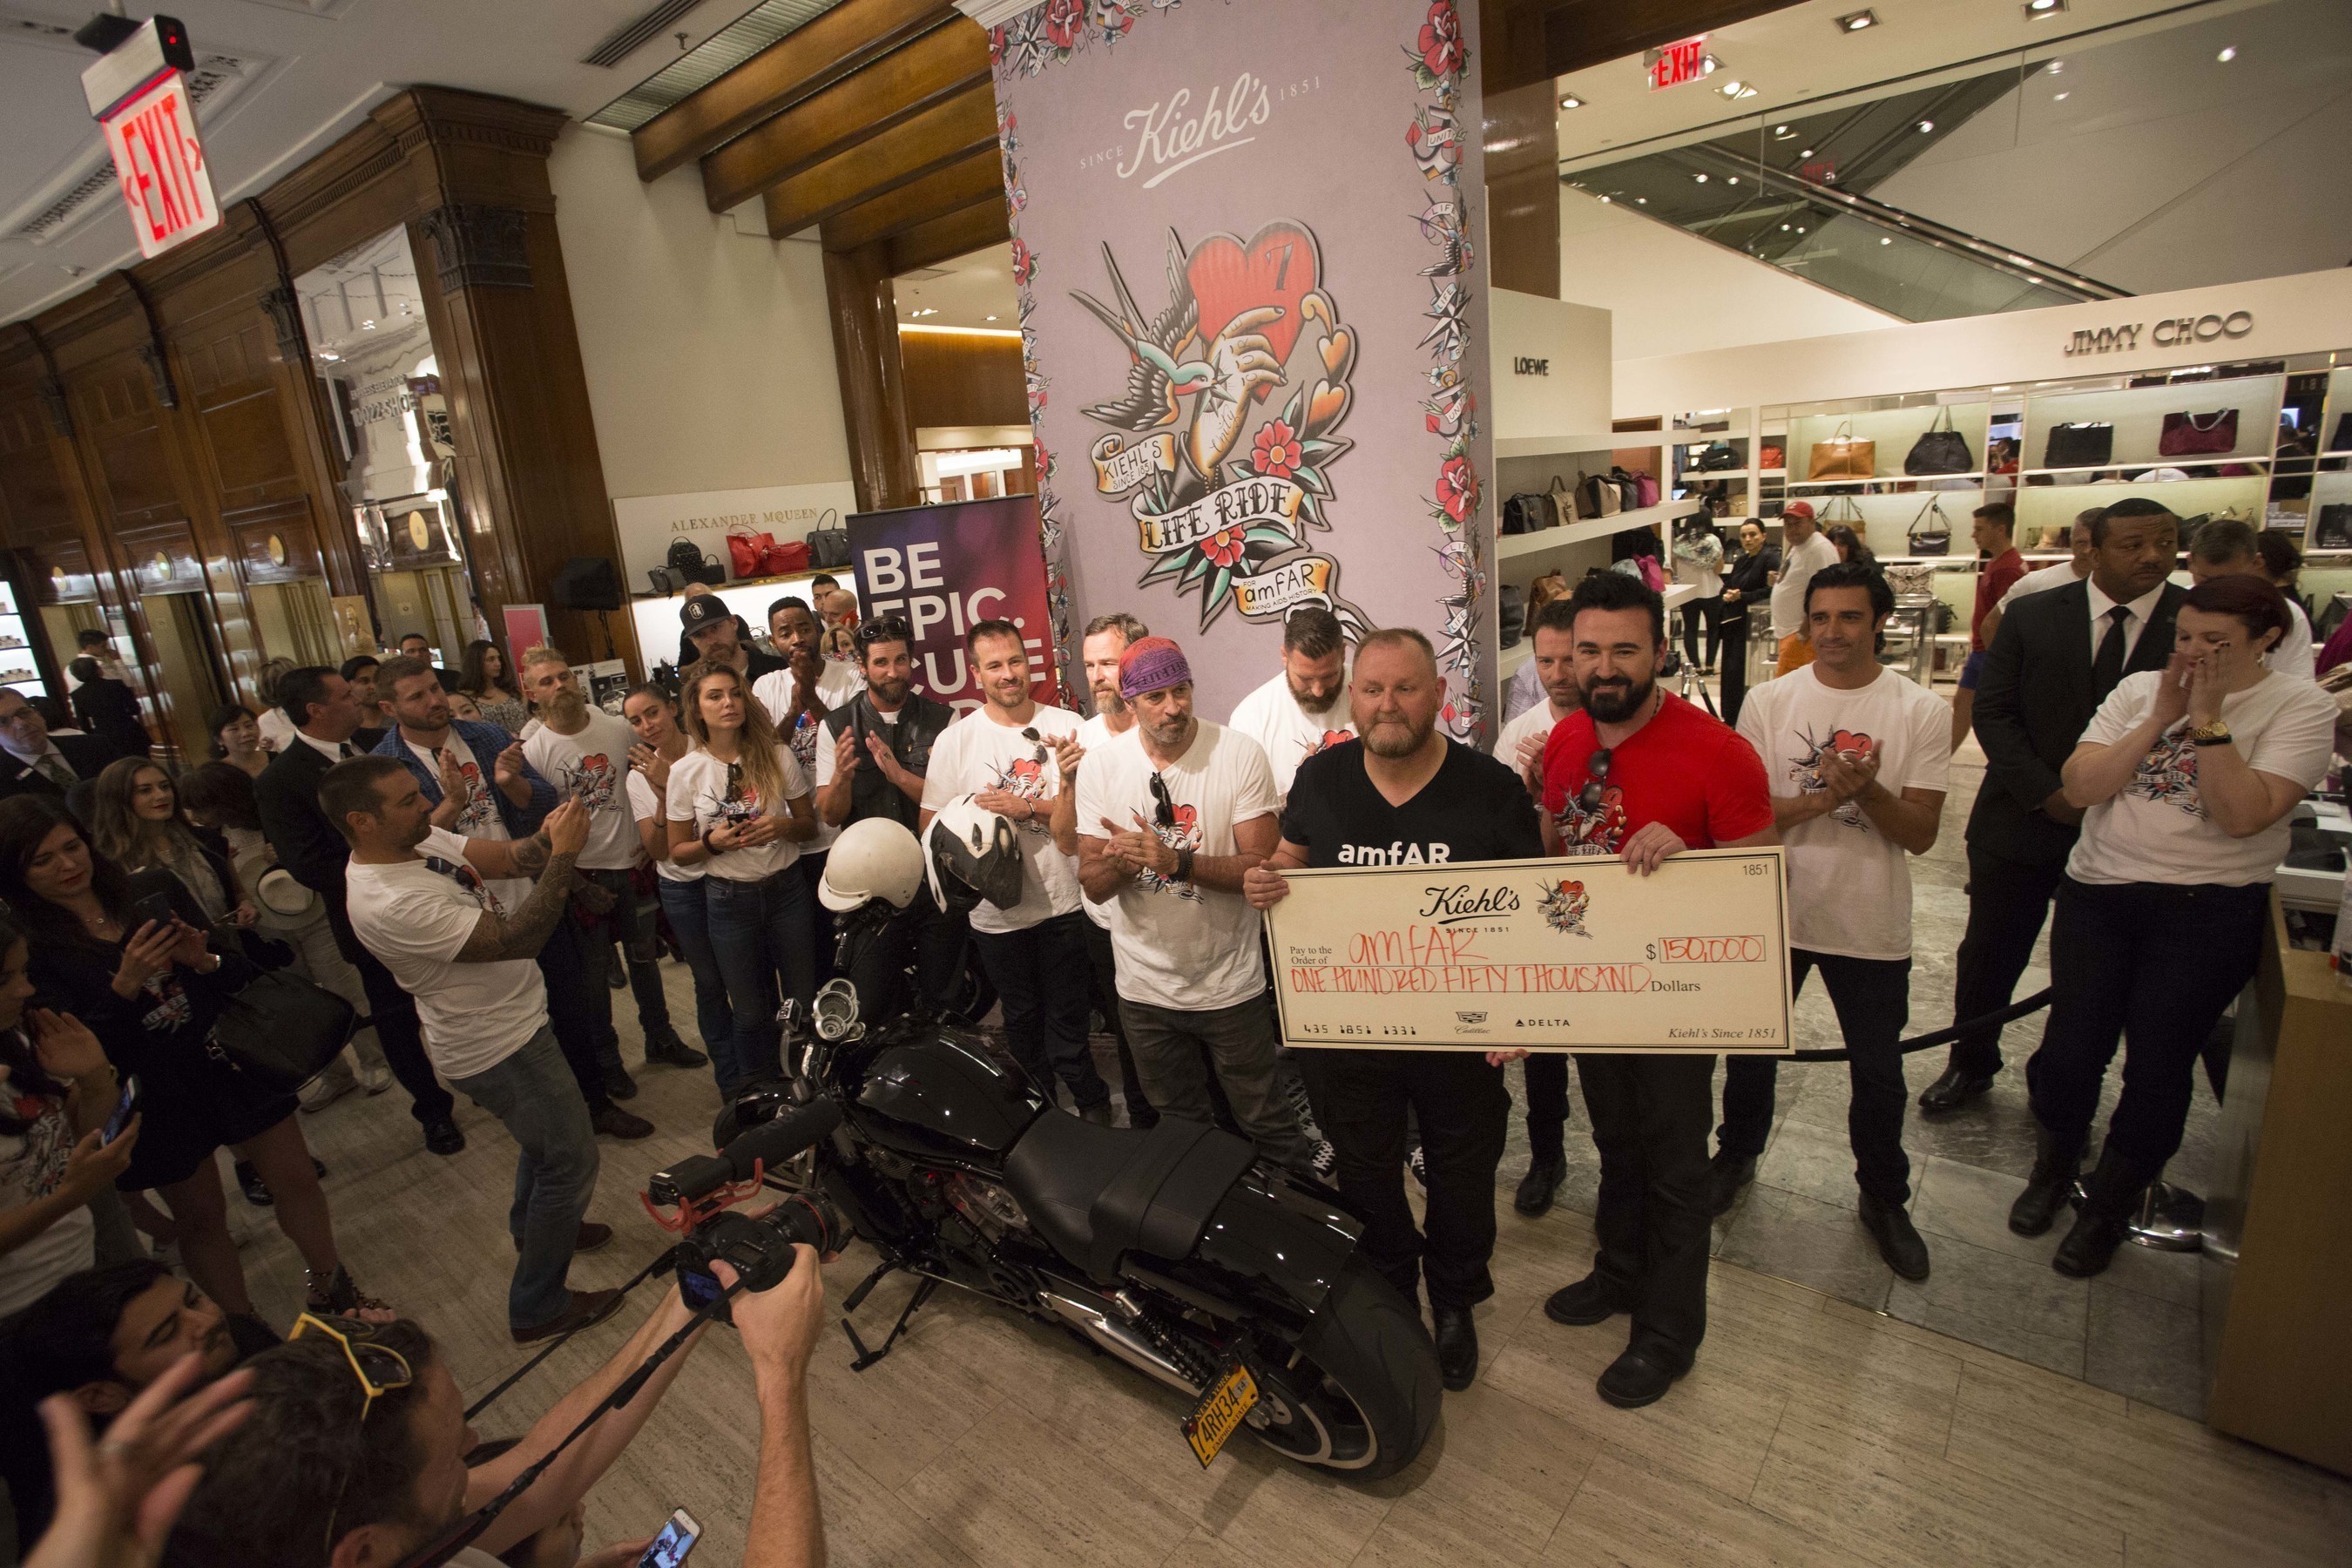 Kevin Robert Frost, CEO of amfAR, The Foundation for AIDS Research, accepts a $150,000 check from Chris Salgardo, President of Kiehl's Since 1851 during Kiehl's LifeRide for amfAR, an annual charity motorcycle ride that took place Aug. 3 through Aug. 13, 2016. Kiehl's and amfAR have announced that the $150,000 raised at this year's Kiehl's LifeRide for amfAR will go toward a specific cure-focused research project led by Satish Pillai, Ph.D., Associate Investigator at the Blood Systems Research Institute and Associate Professor of Laboratory Medicine at the University of California, San Francisco.